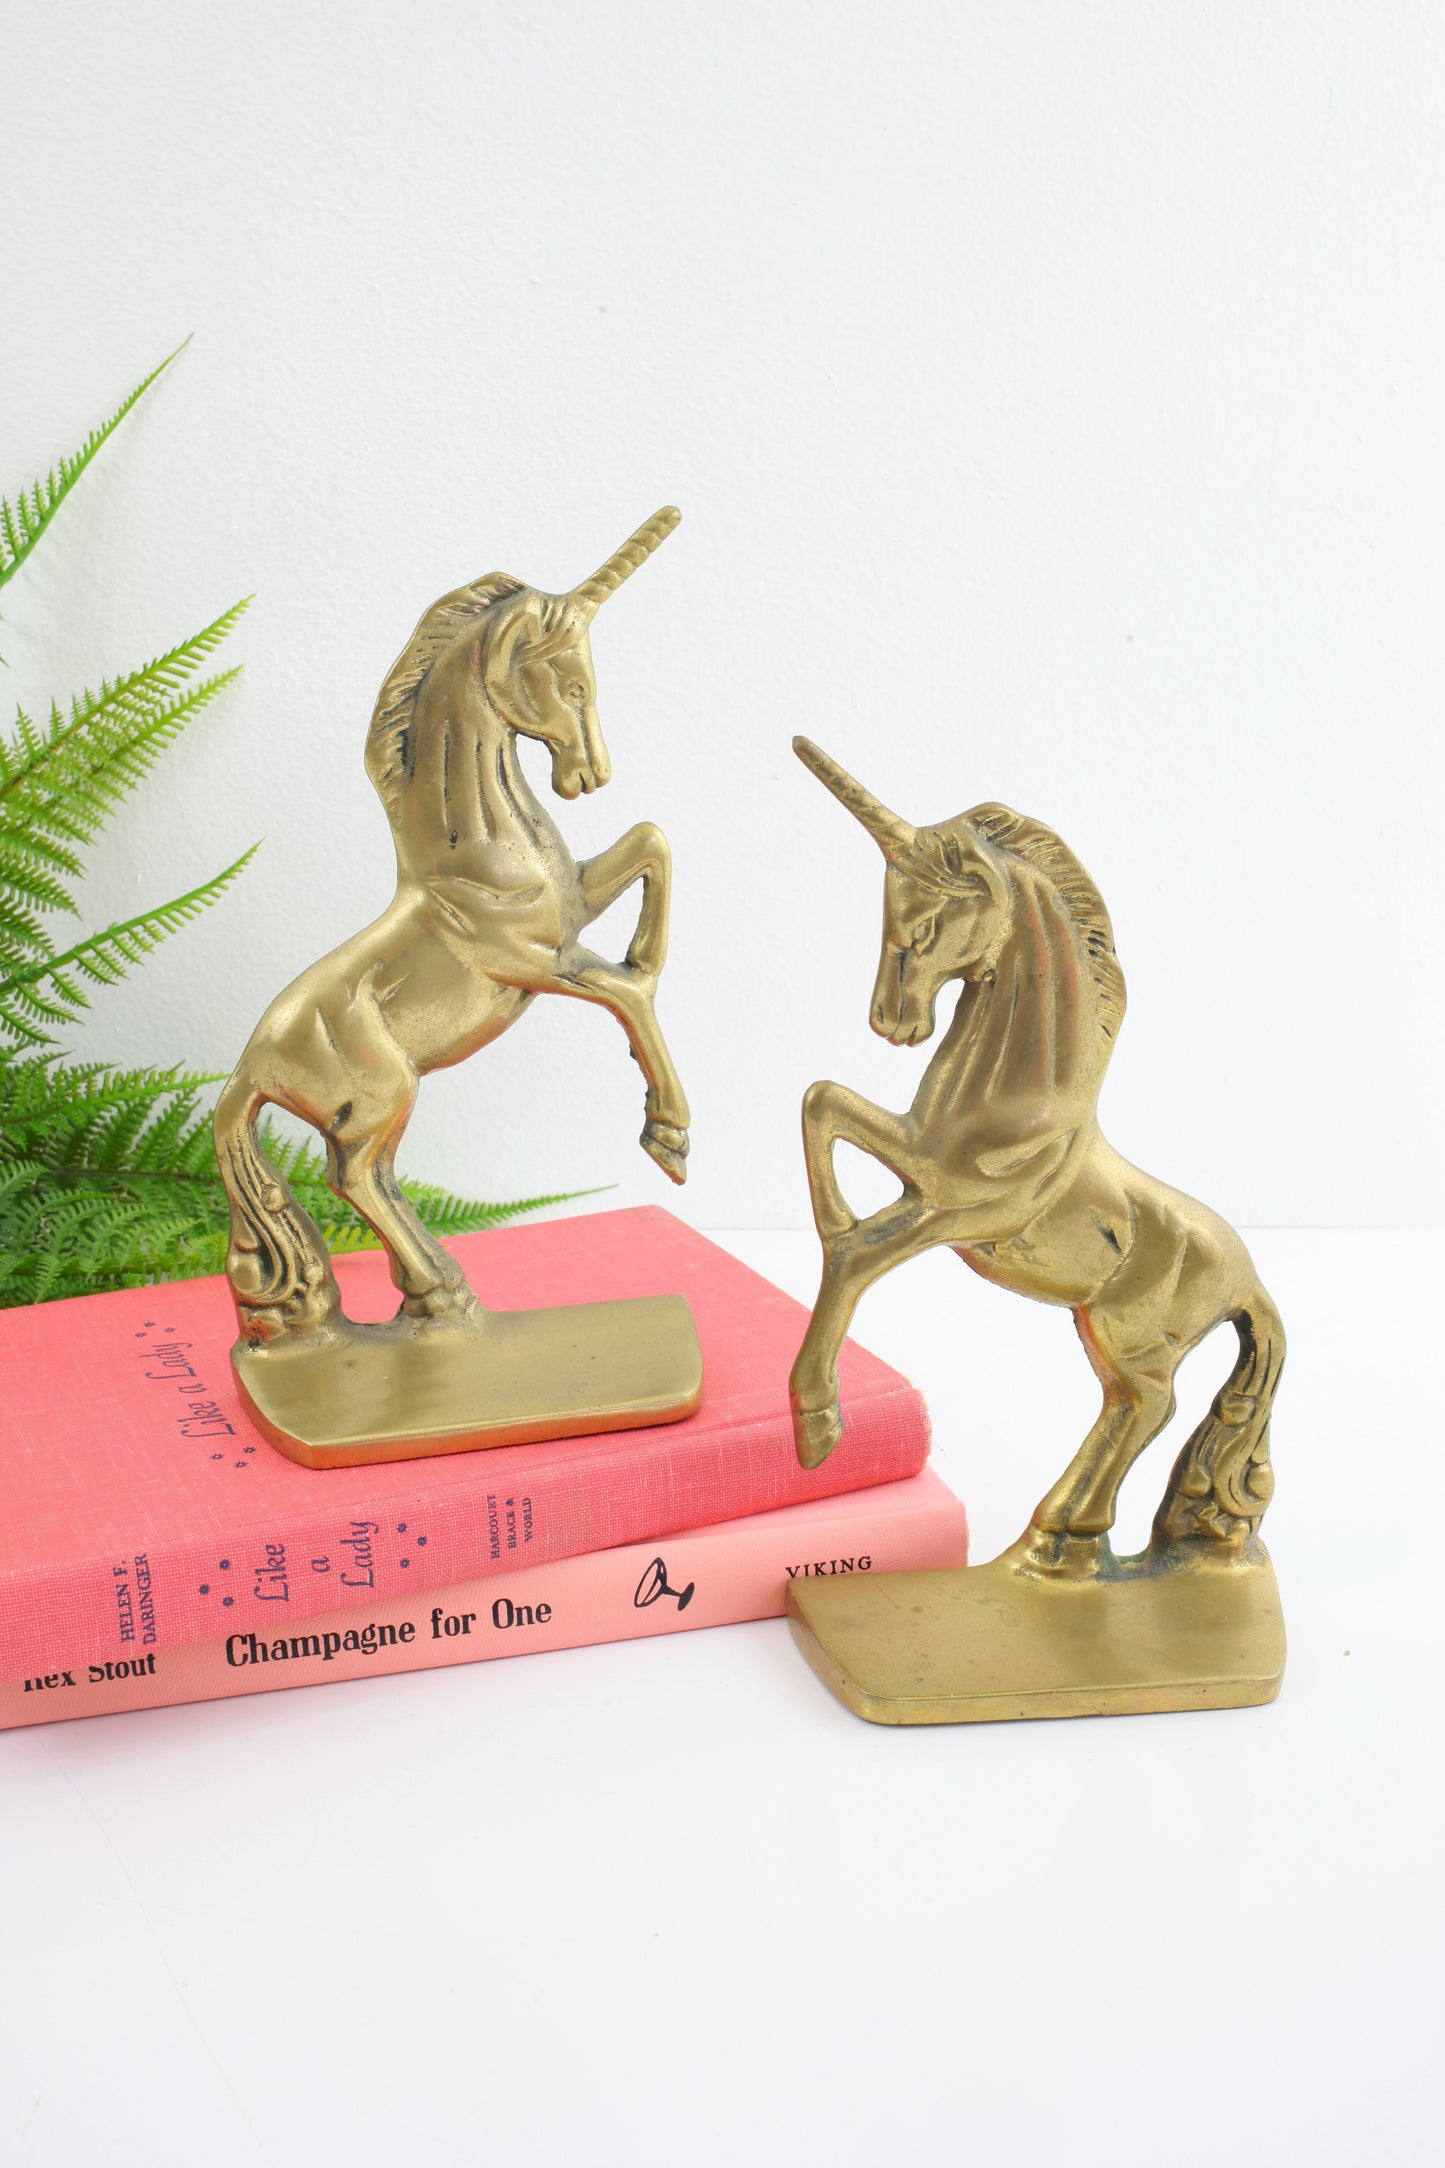 SOLD - Vintage Brass Unicorn Bookends